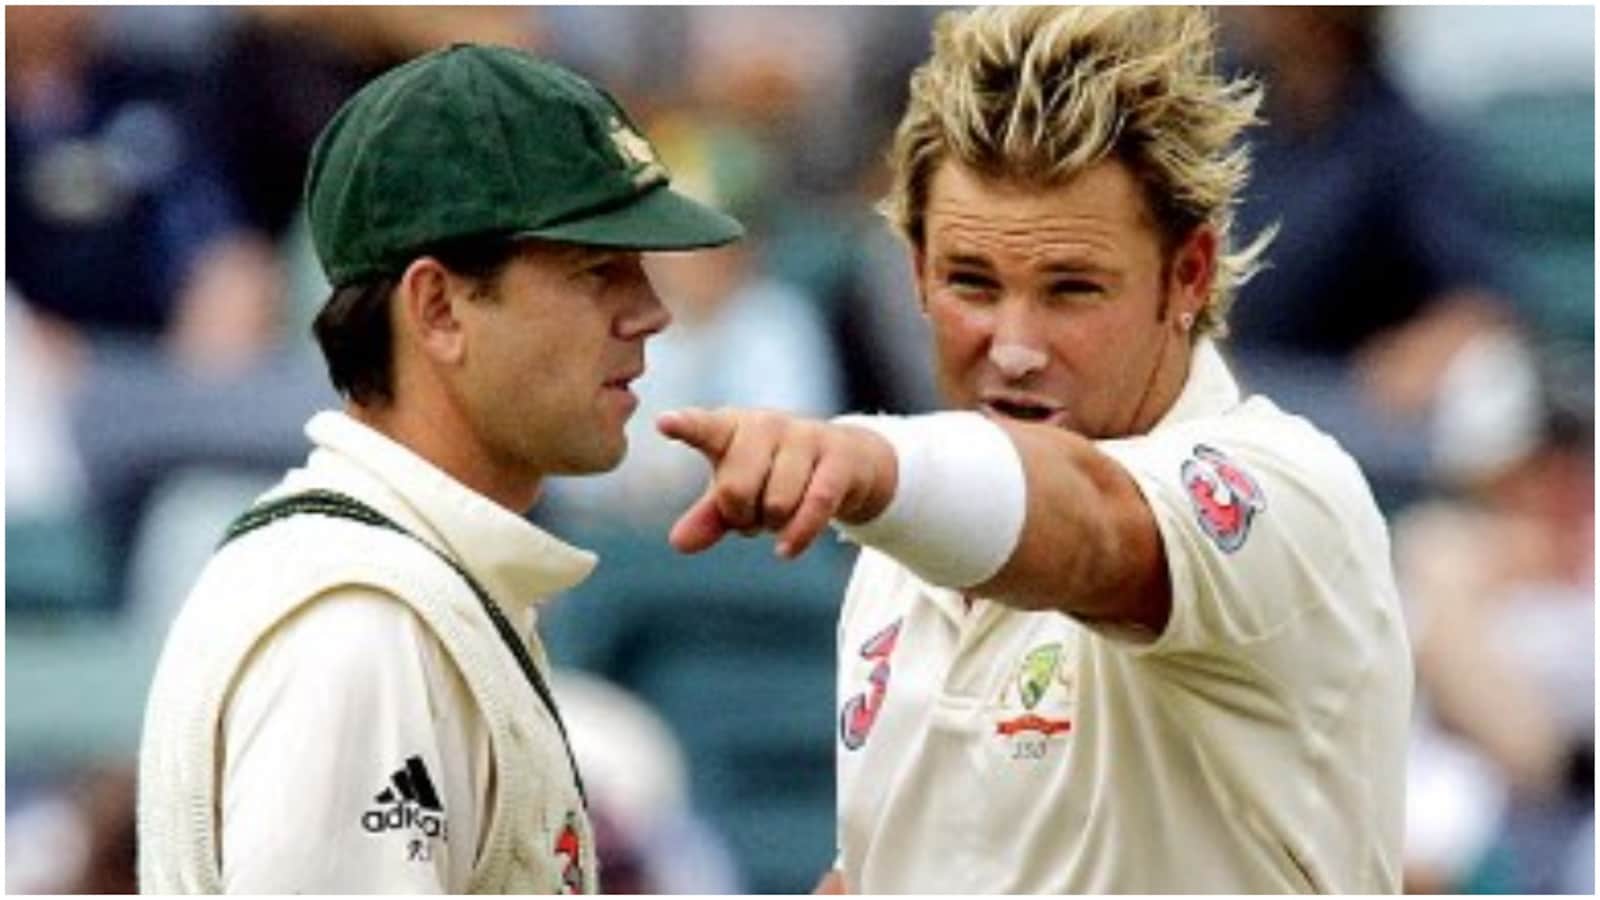 Big part of my life': Ricky Ponting's tearful tribute to Shane Warne